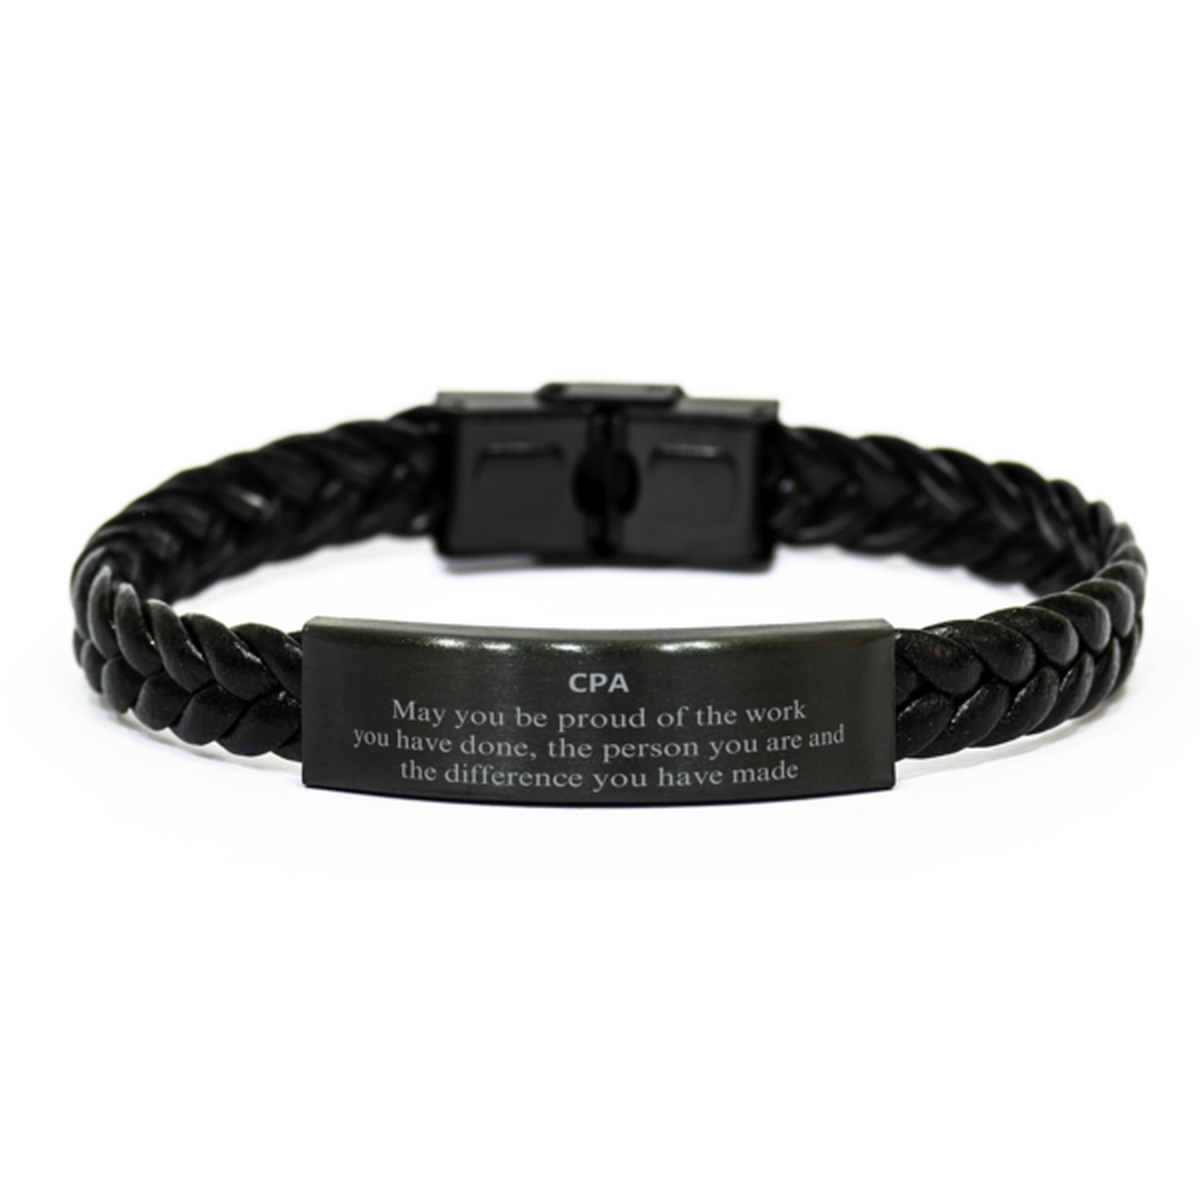 CPA May you be proud of the work you have done, Retirement CPA Braided Leather Bracelet for Colleague Appreciation Gifts Amazing for CPA